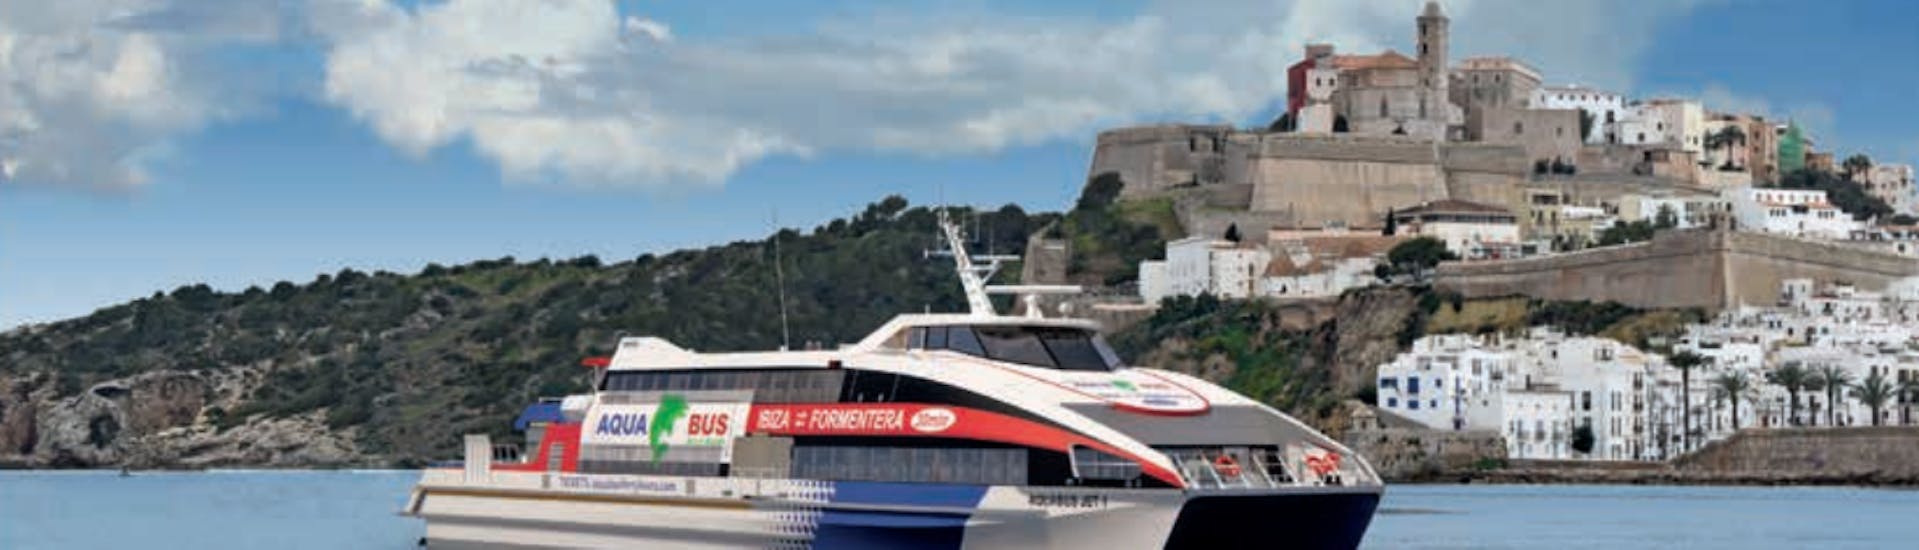 Boat of Aquabus Ferry Boats Ibiza with Ibiza Town in the background.